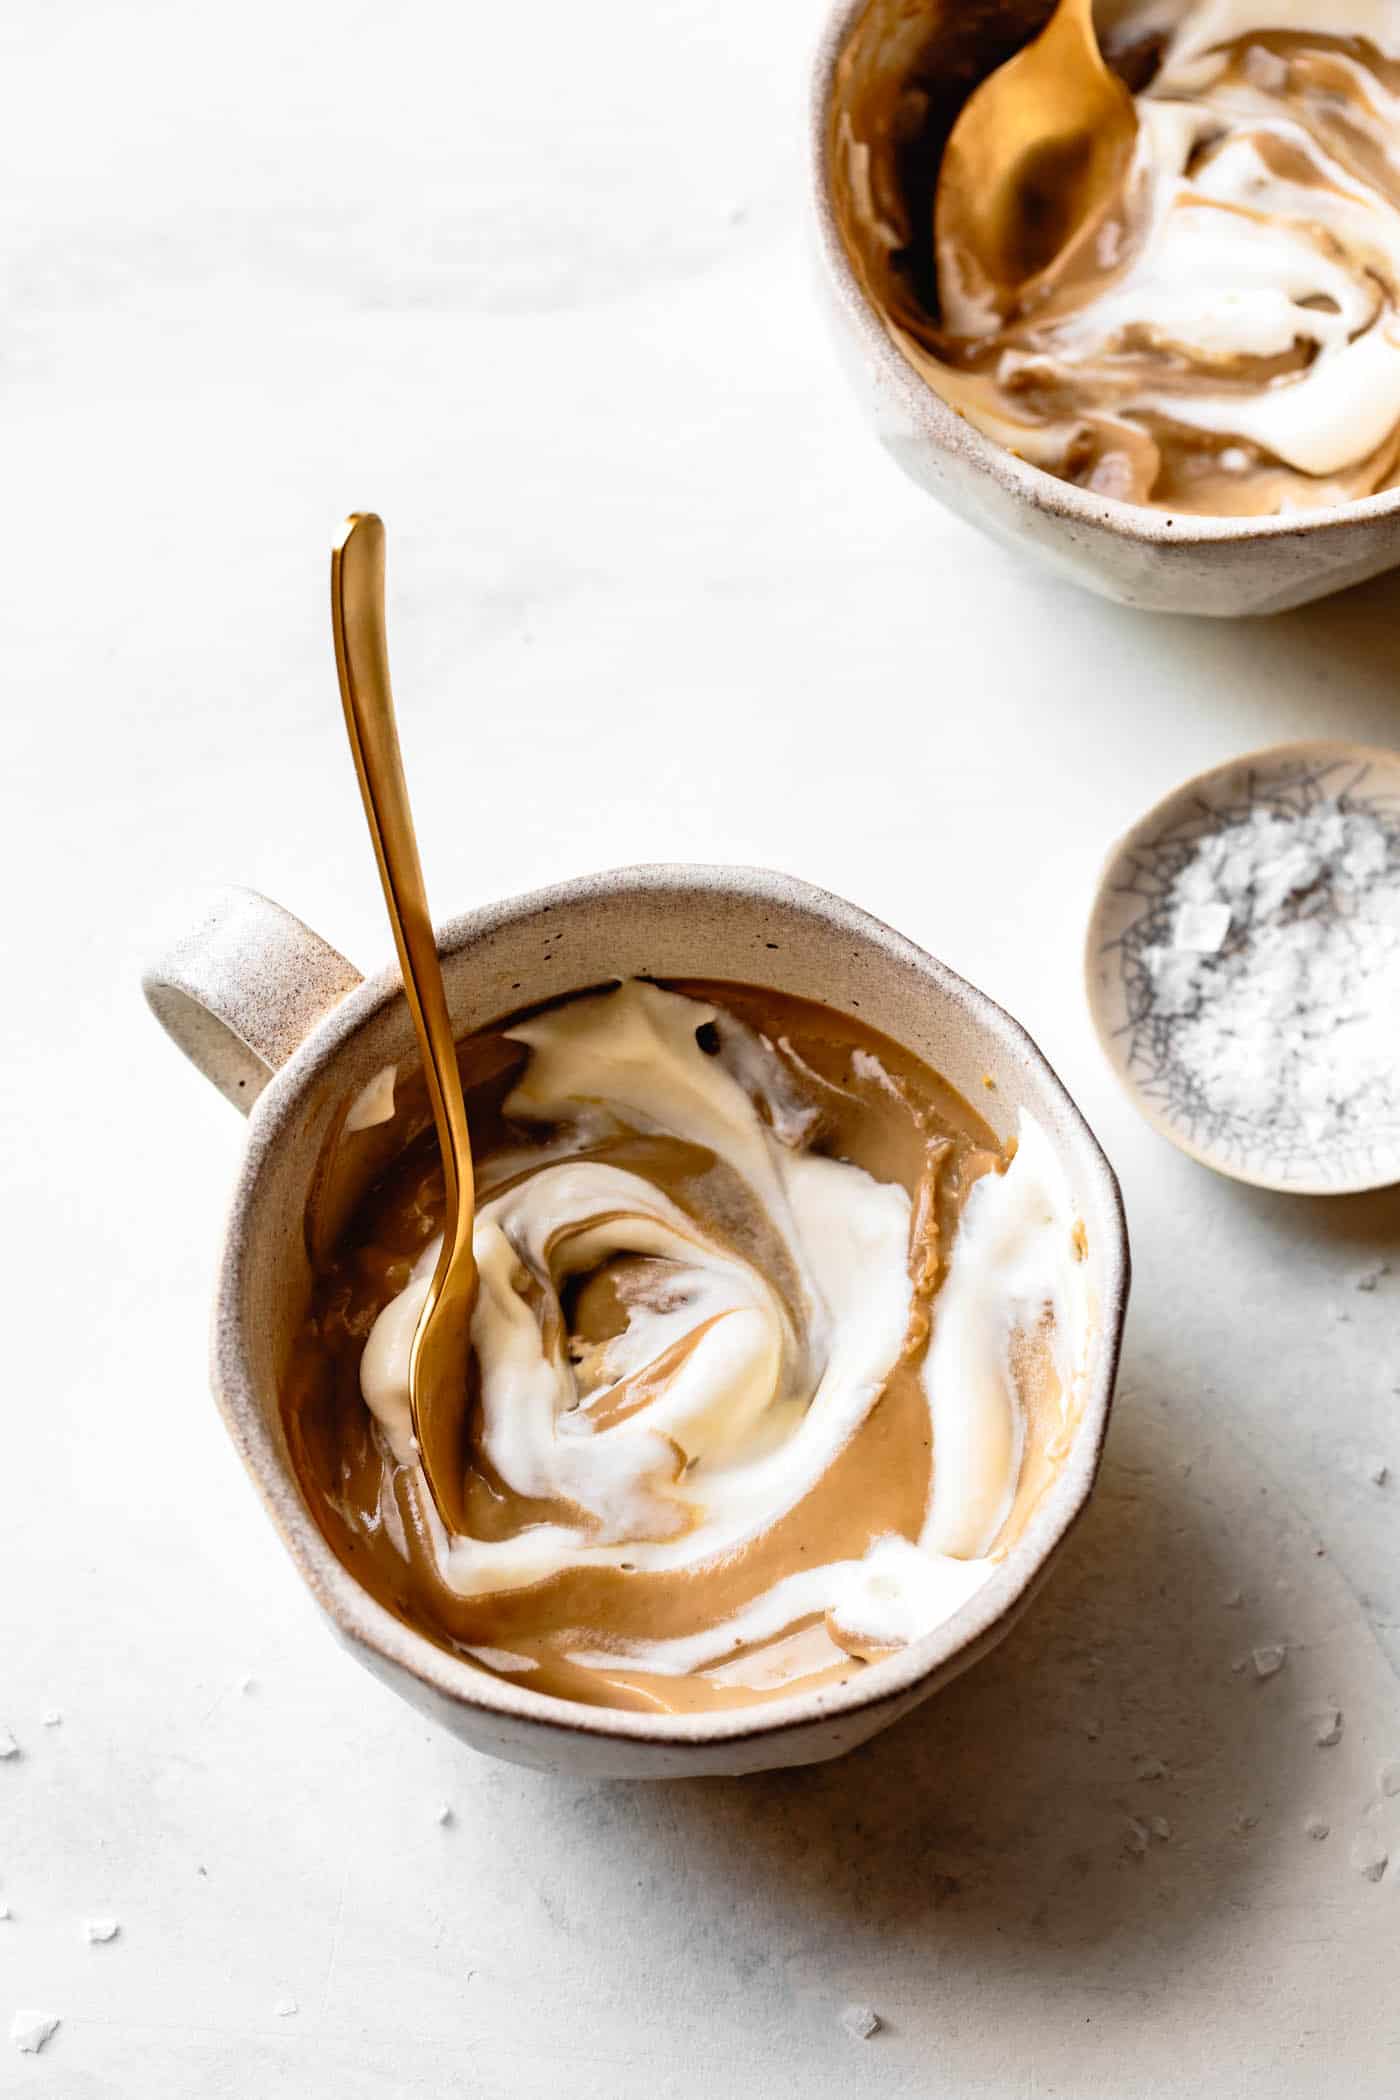 vegan butterscotch pudding with whipped cream swirled in a mug